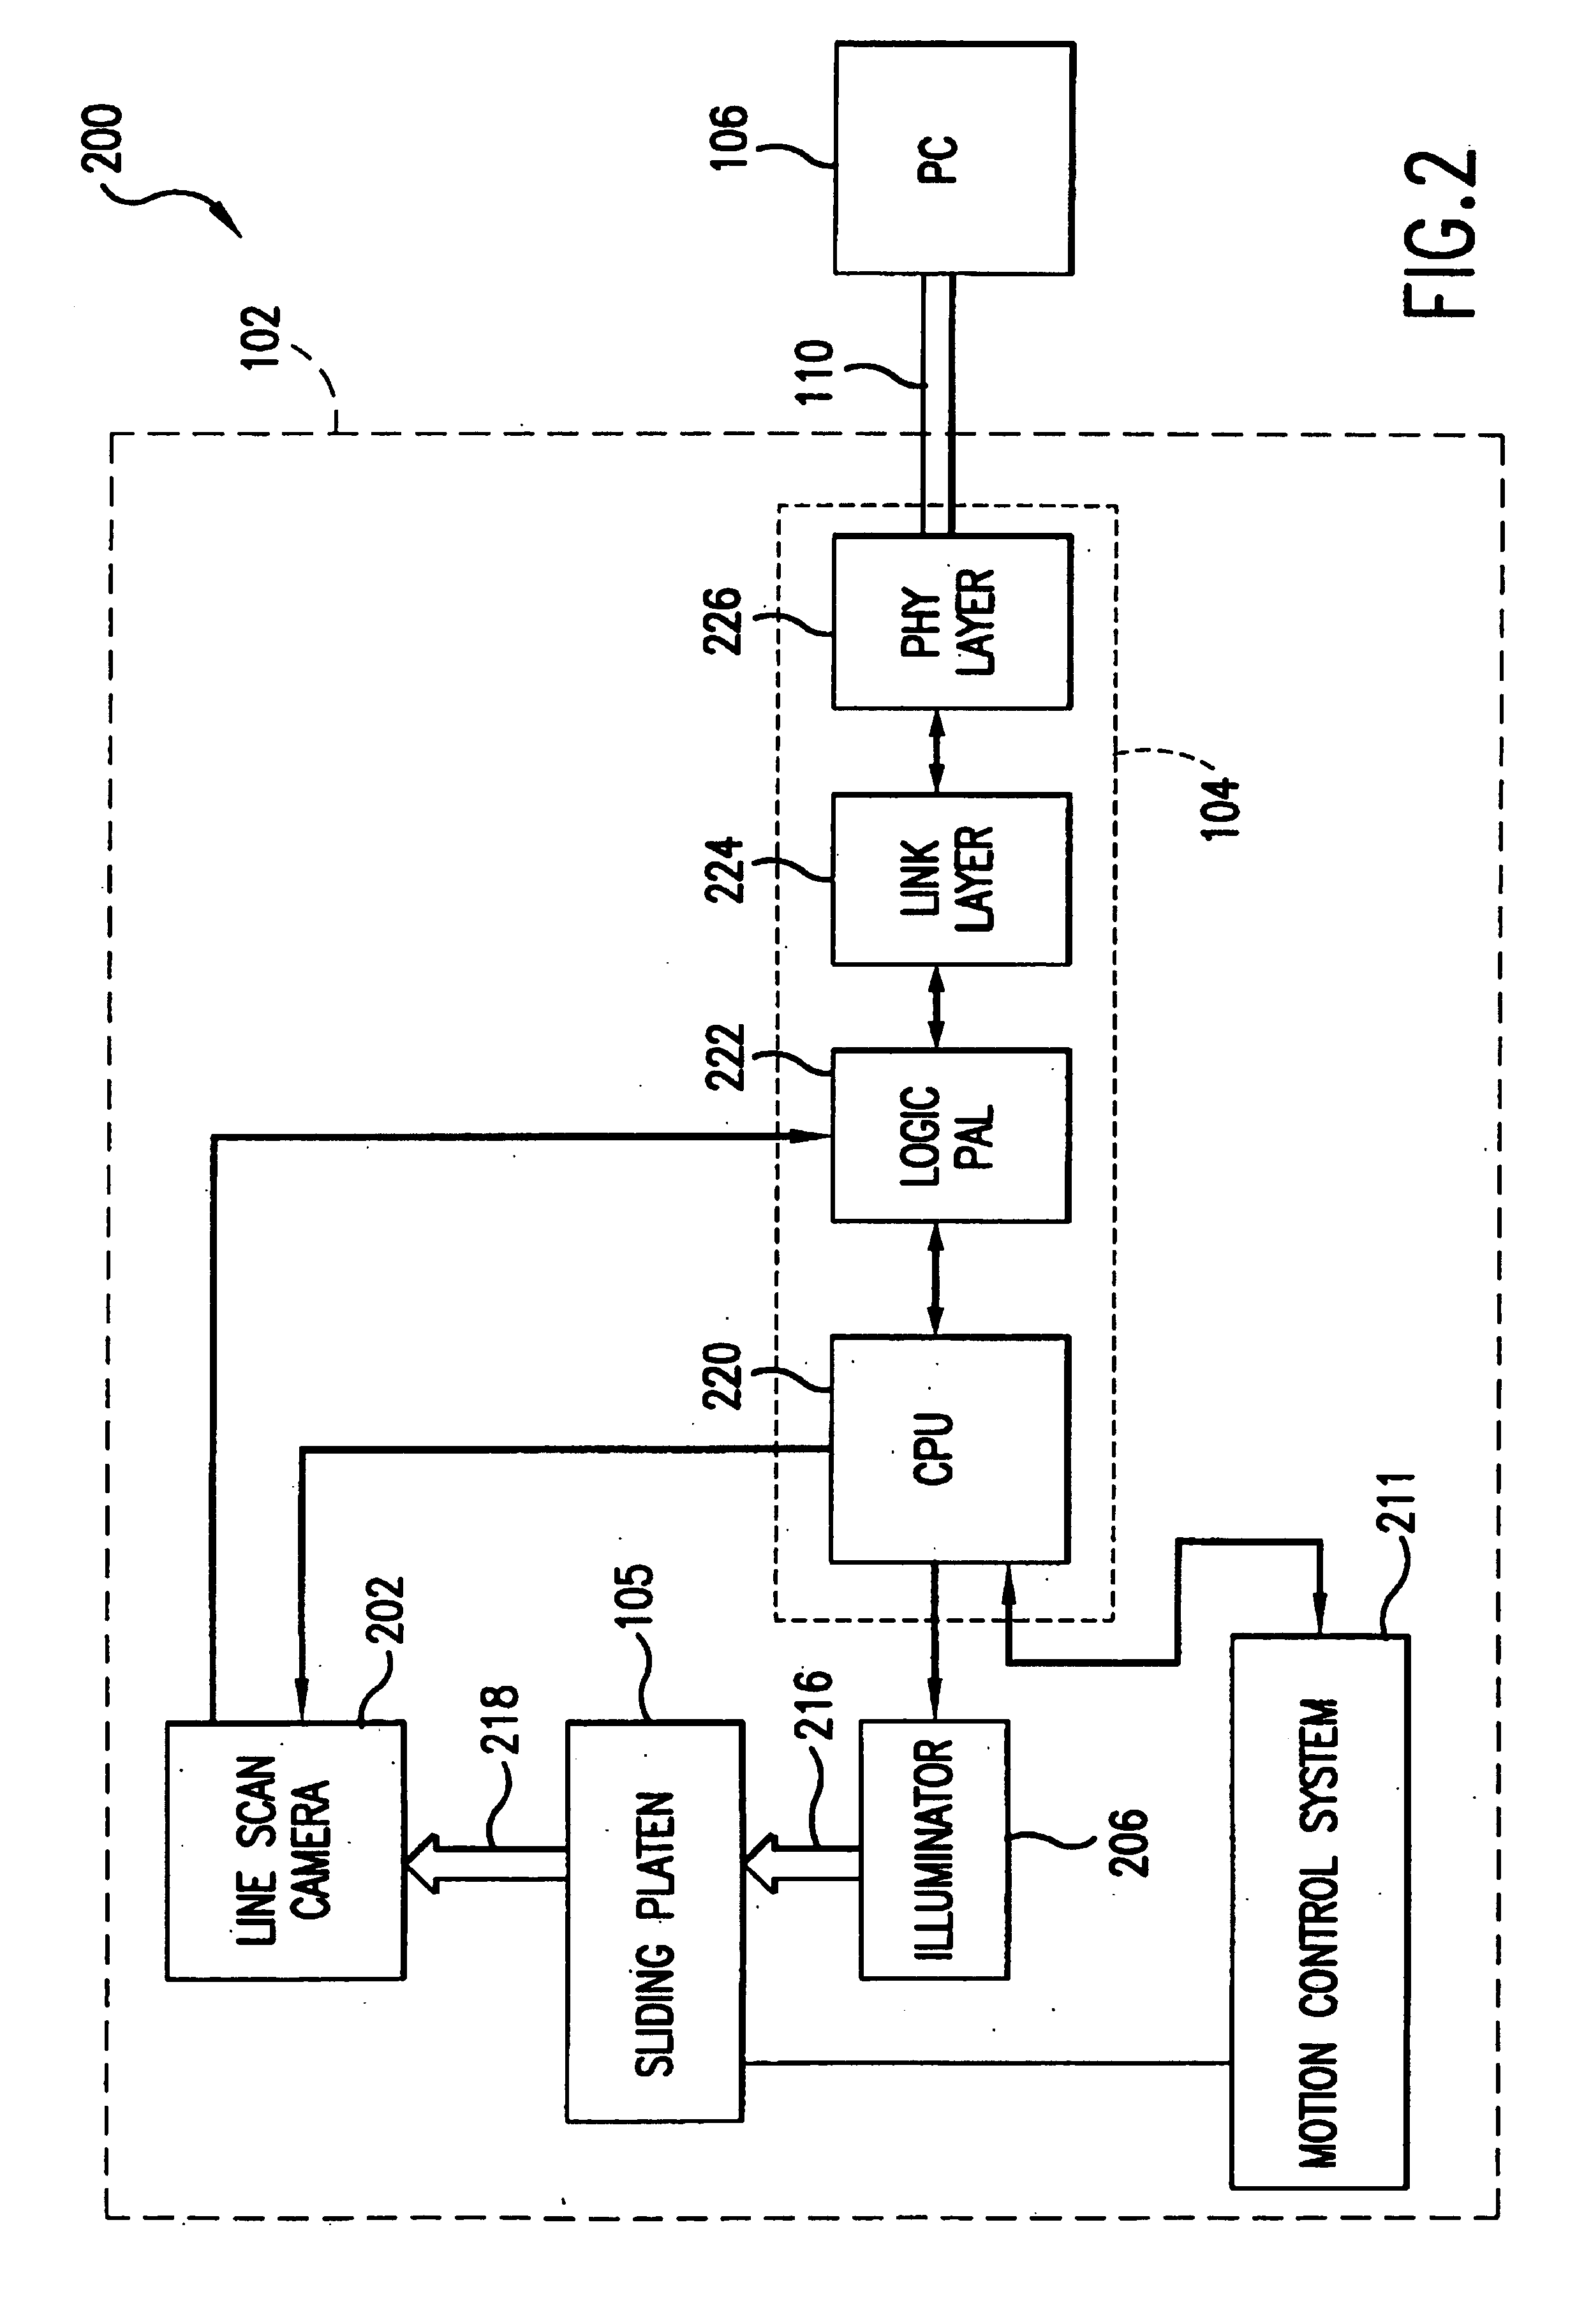 Method, system, and computer program product for control of platen movement during a live scan